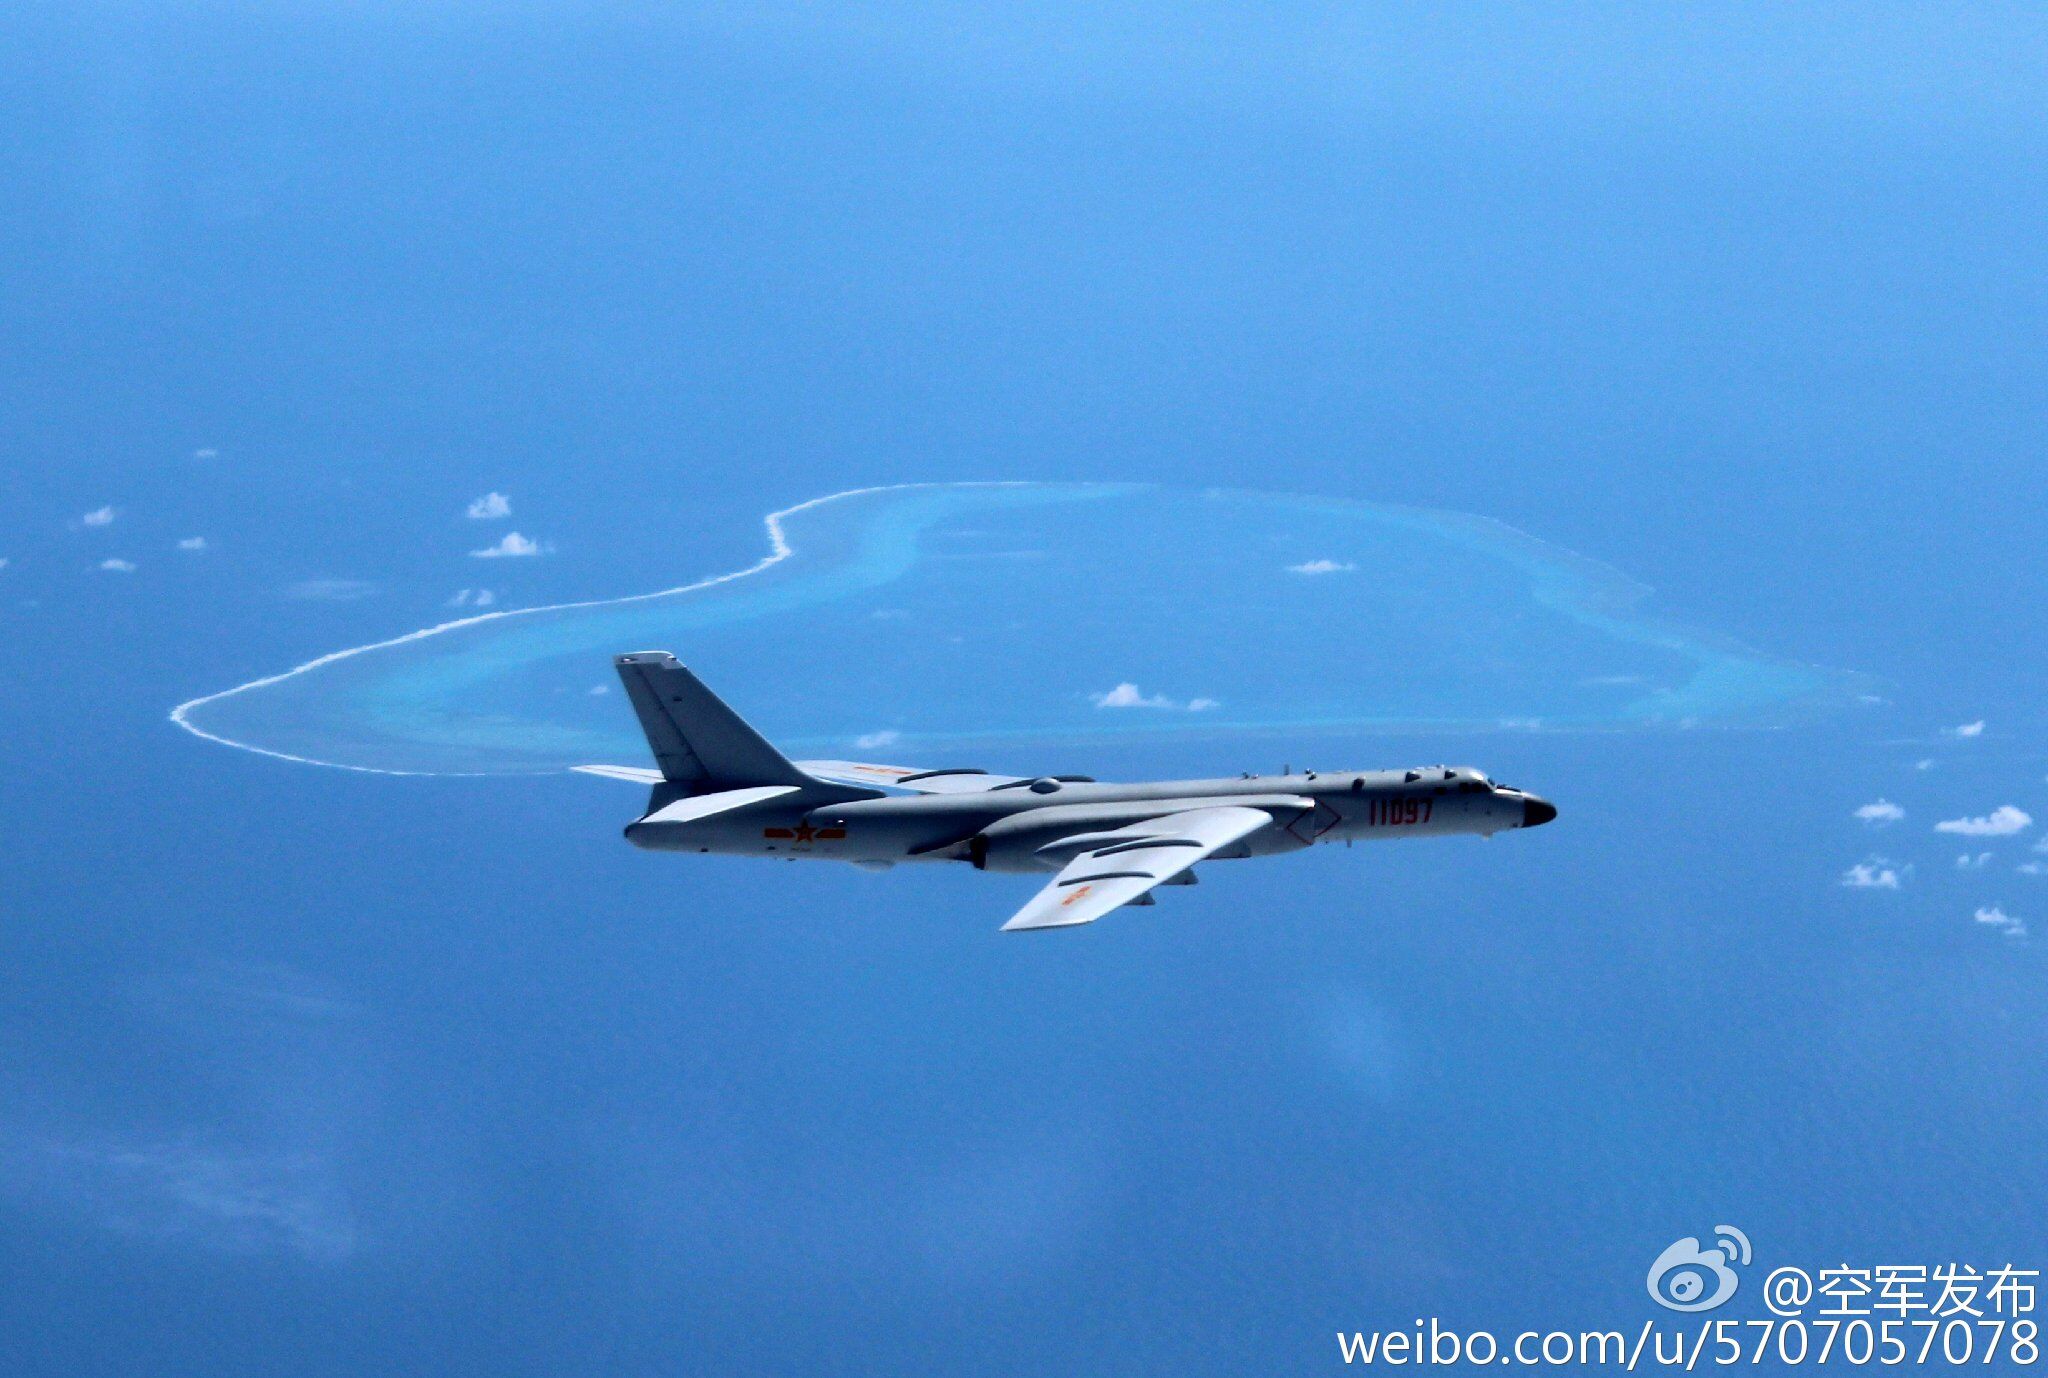 China SCIO on Twitter: "And some photos brought by PLA Air Force: bomber H- 6K fly over Huangyan Island https://t.co/S2pMMsemf0" / Twitter